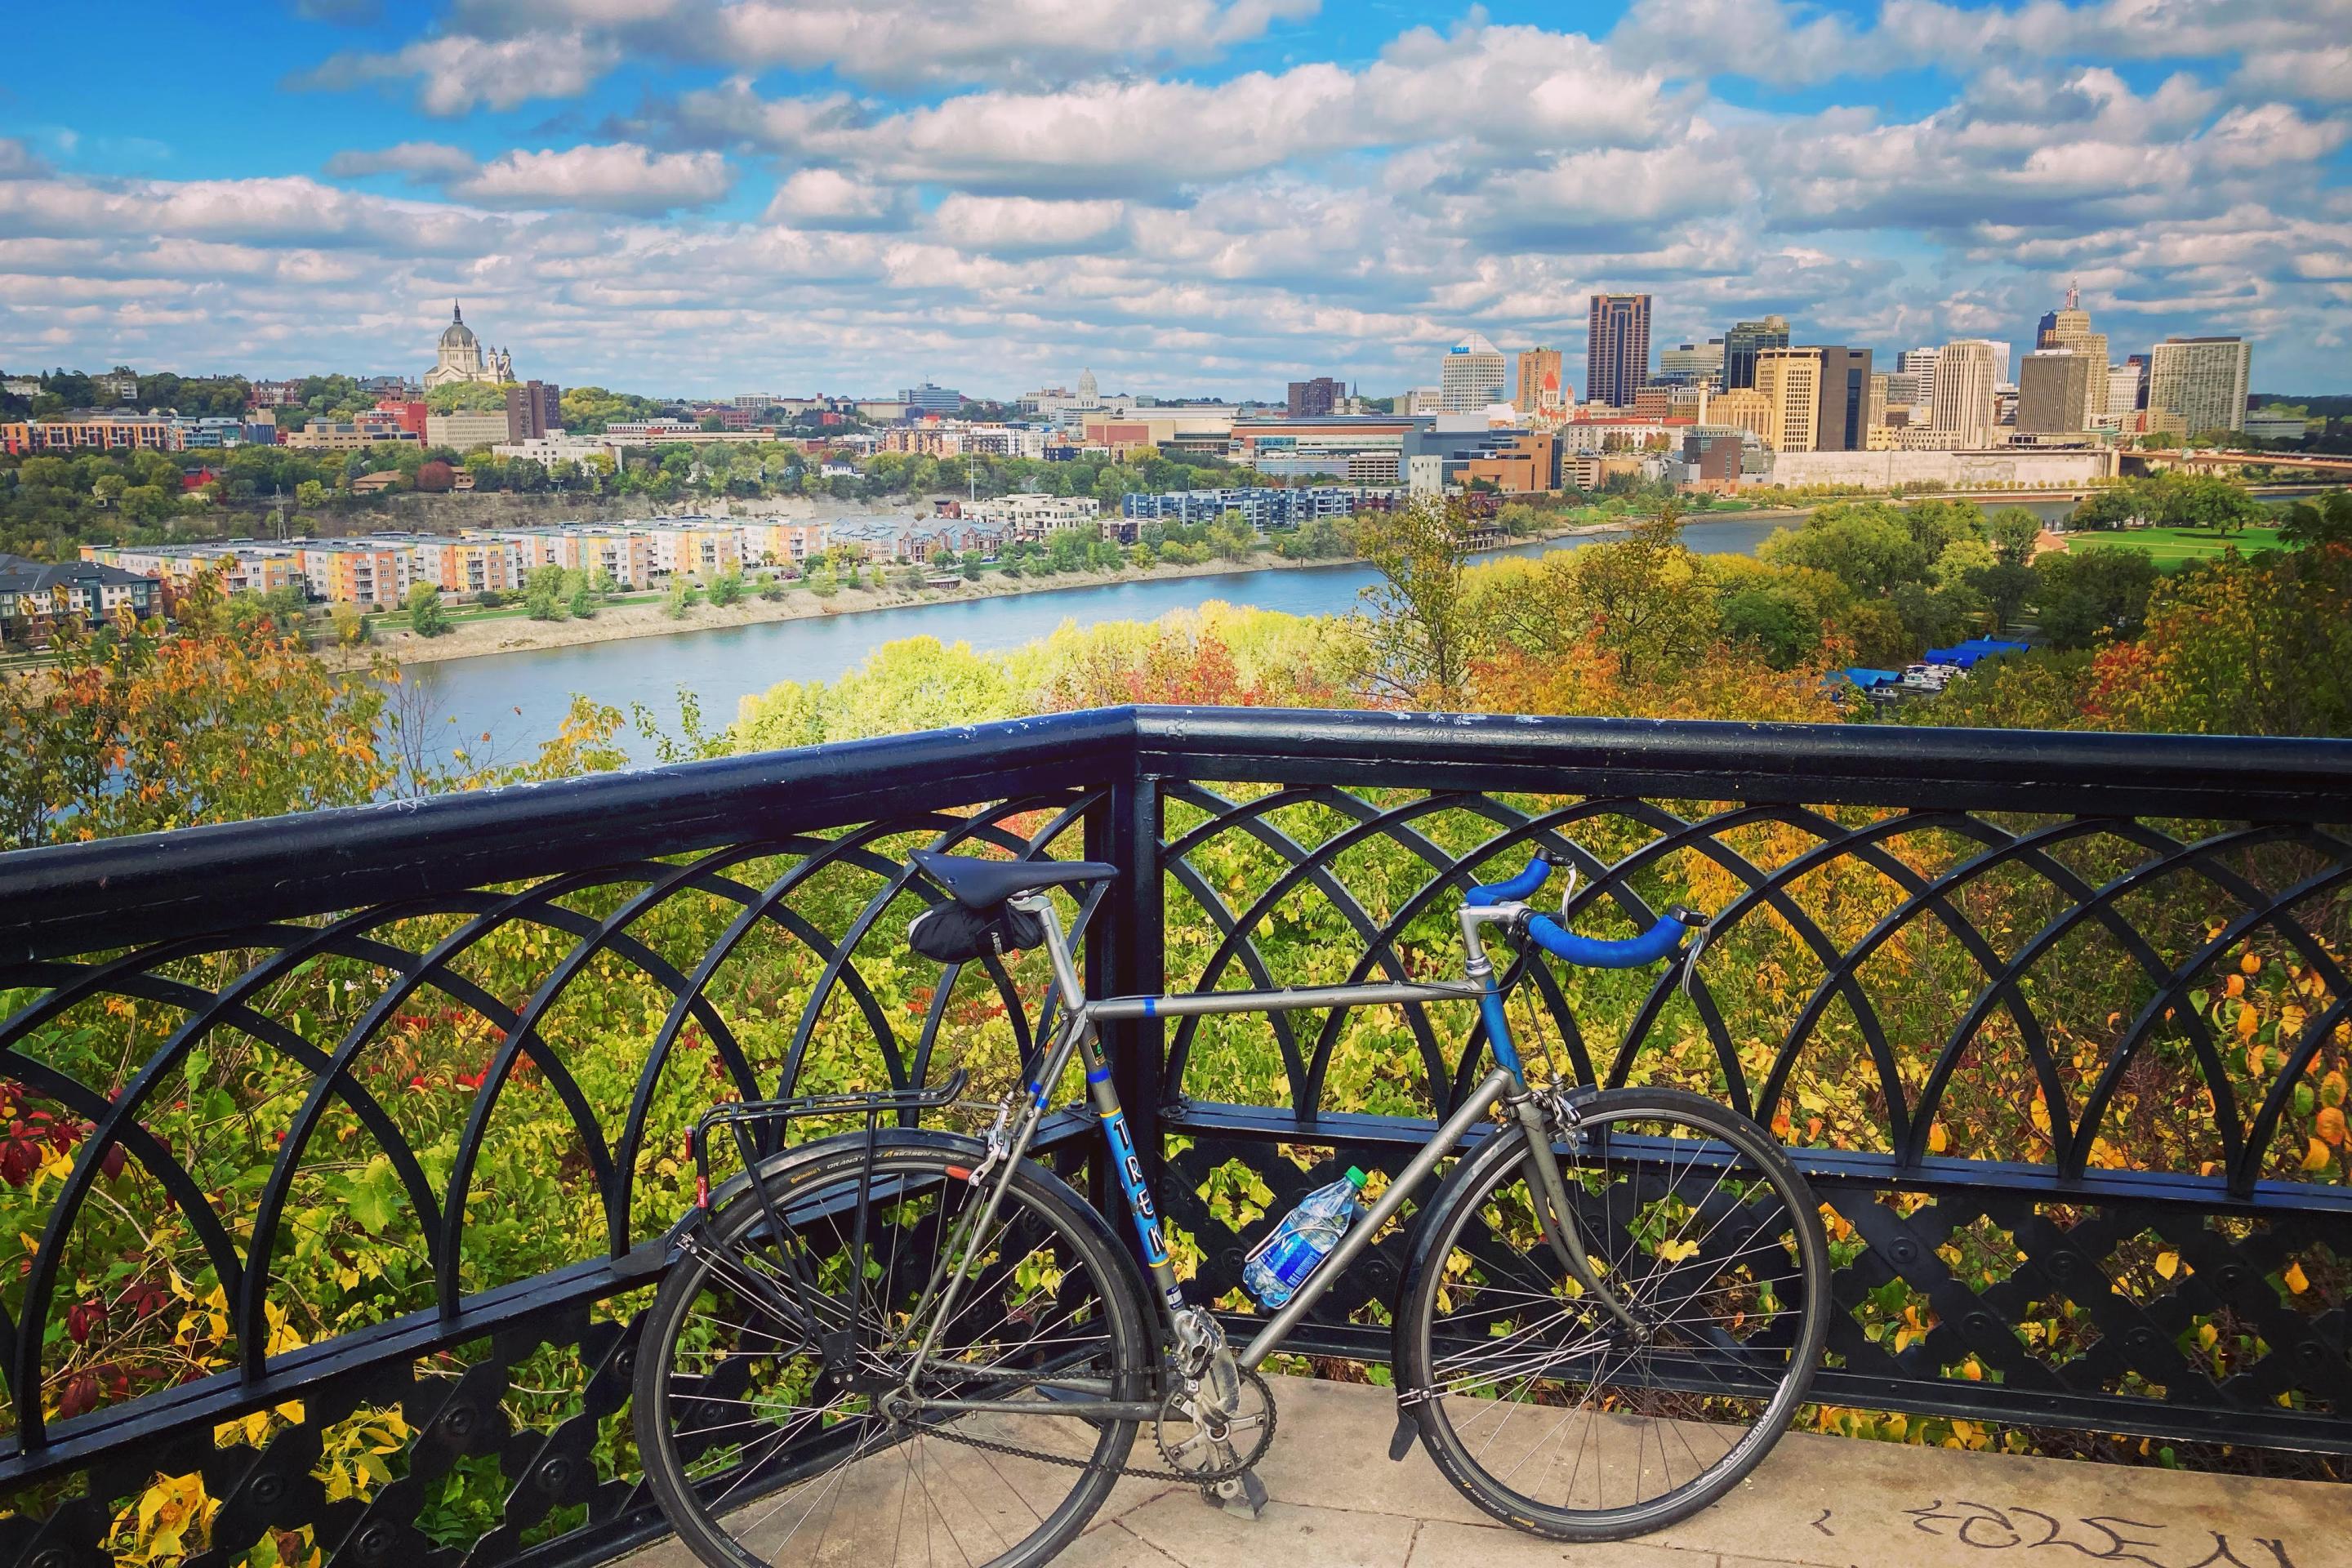 a bike leans up against a black grate overlooking the mississippi river, with the city in the background